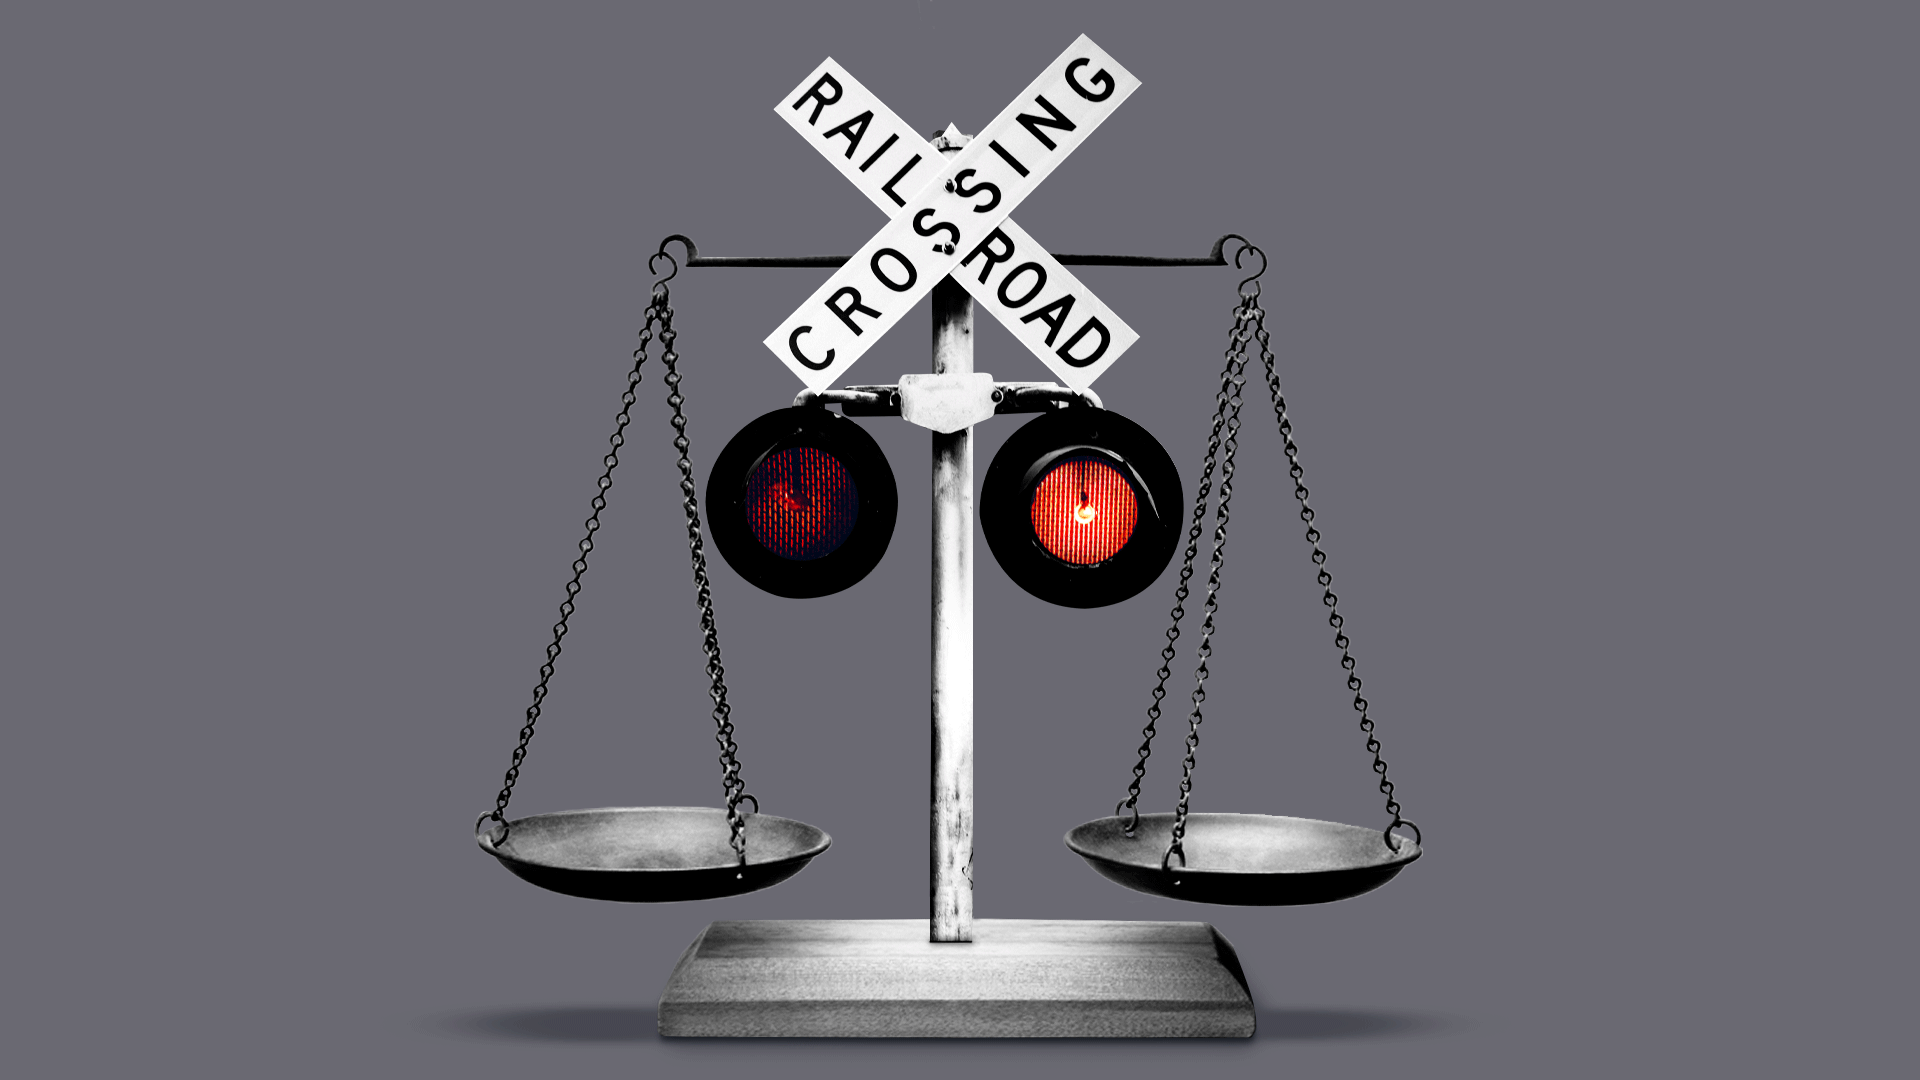 Animated illustration of scales with railroad crossing lights blinking